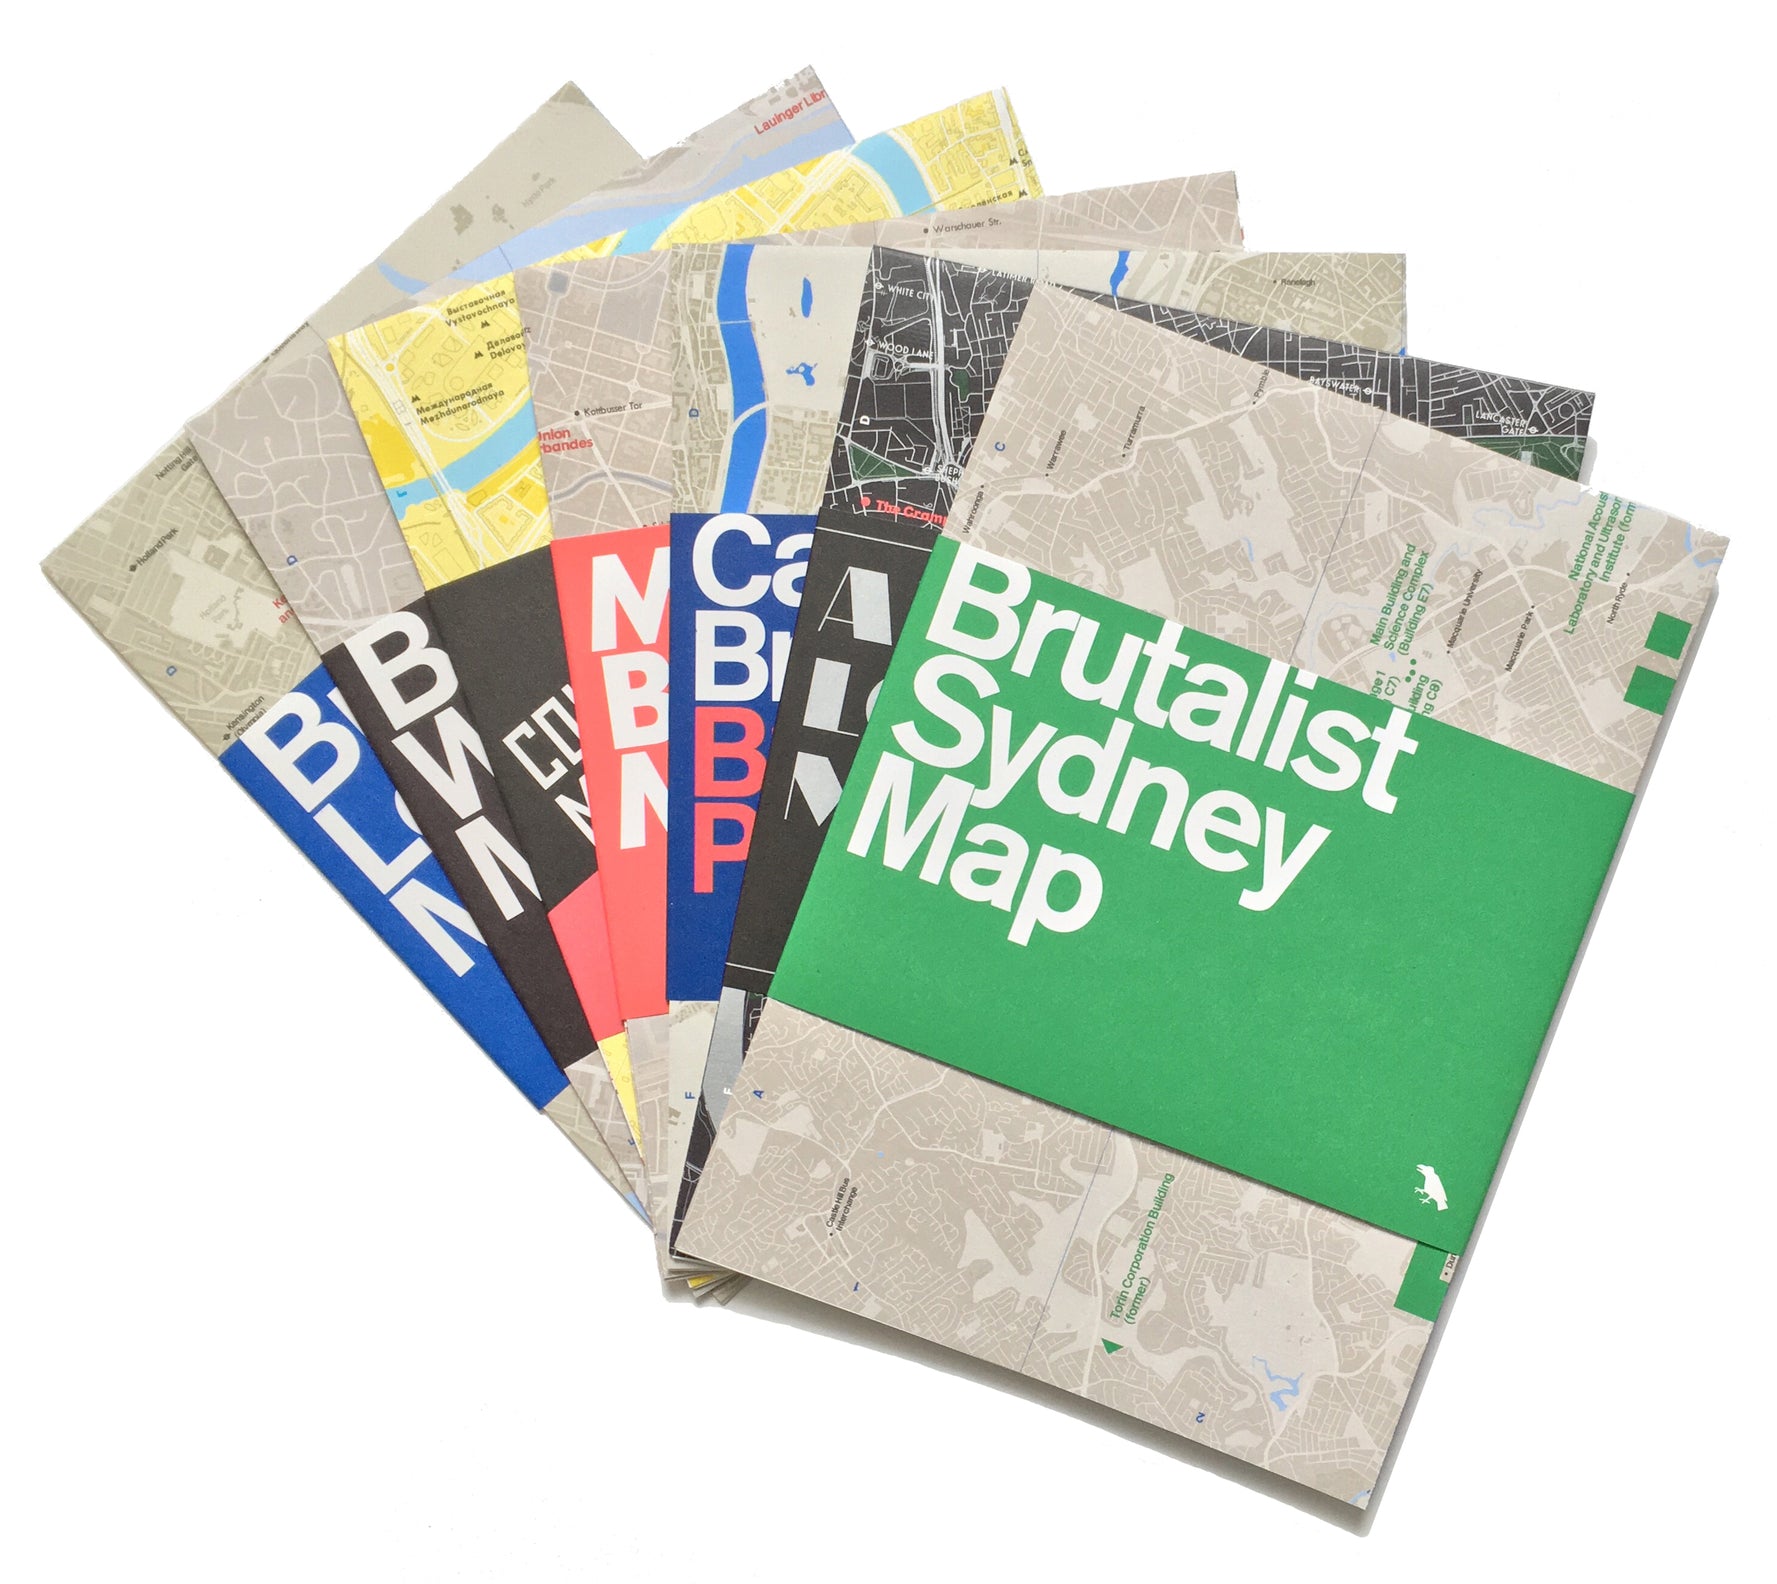 Moscow Metro Architecture & Design Map cover